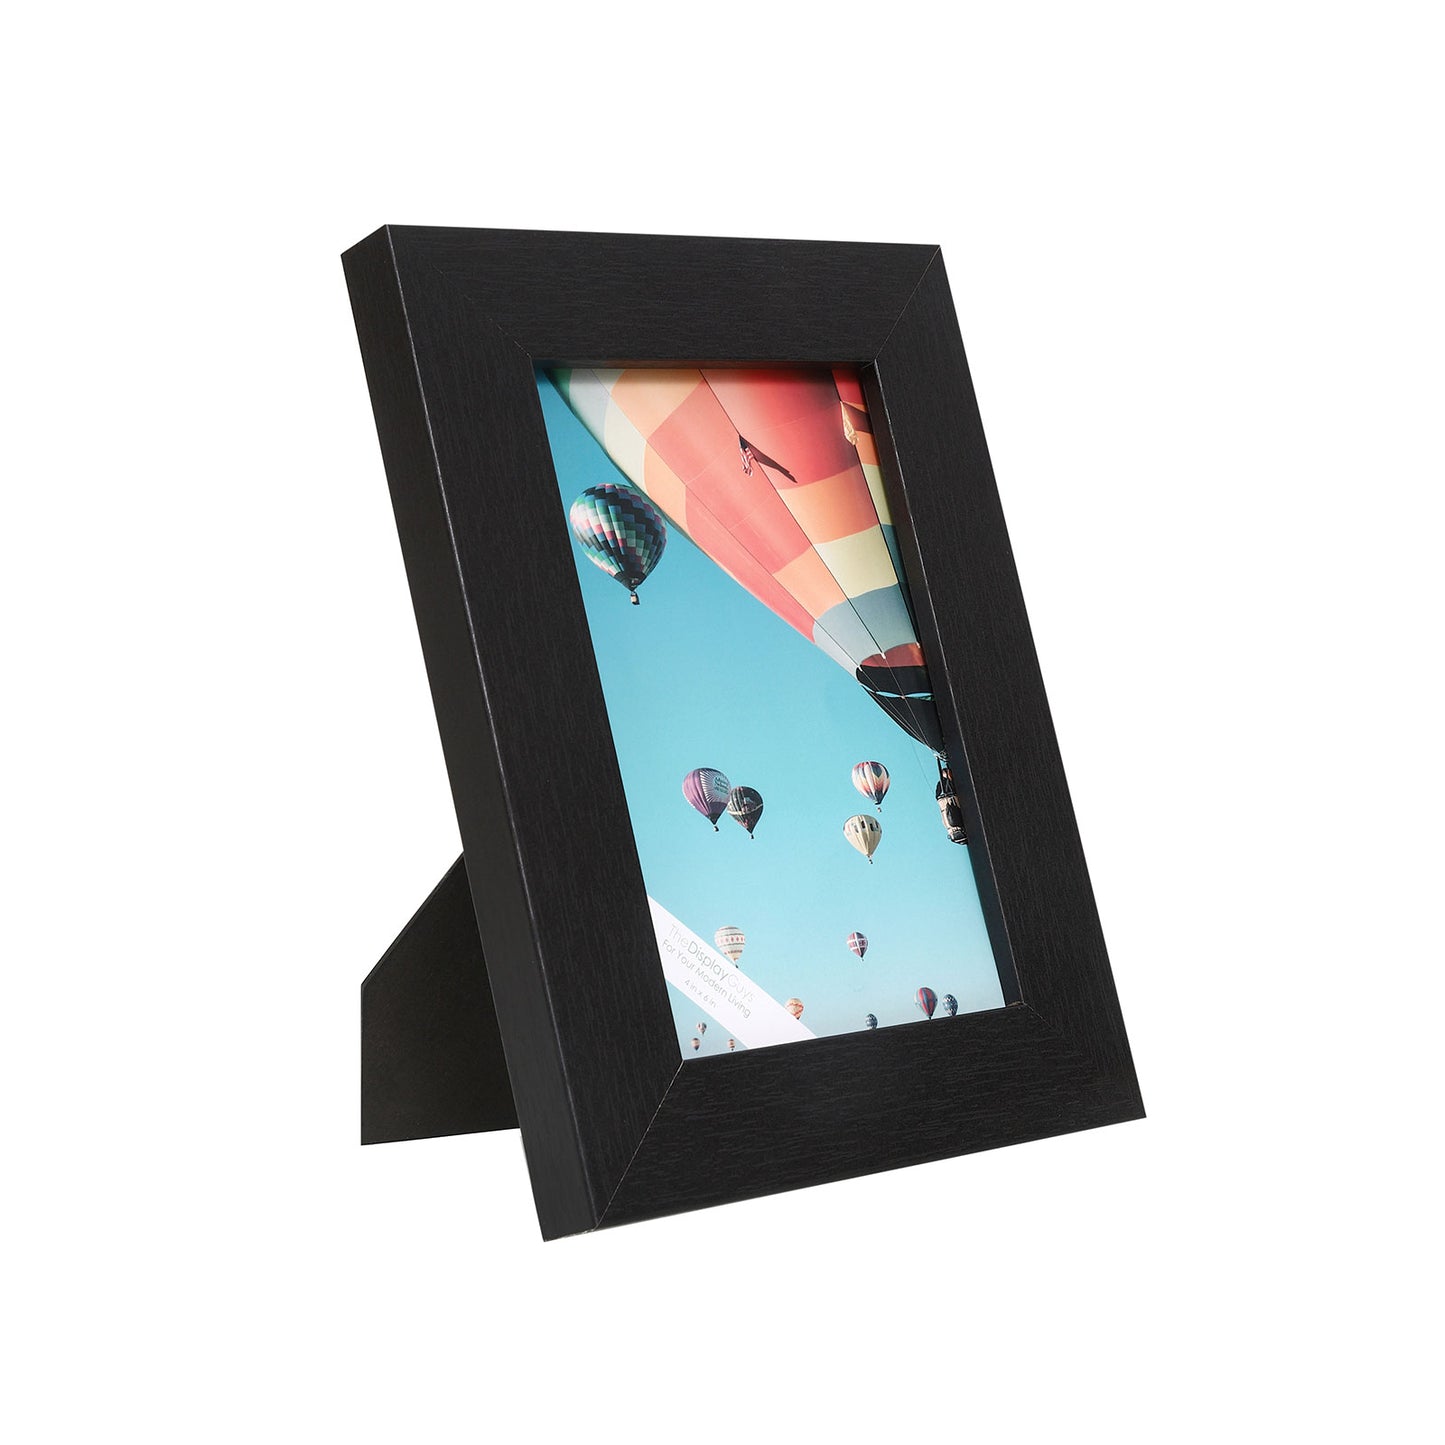 4" x 6" Matte Black MDF Wood Picture Frame with Tempered Glass